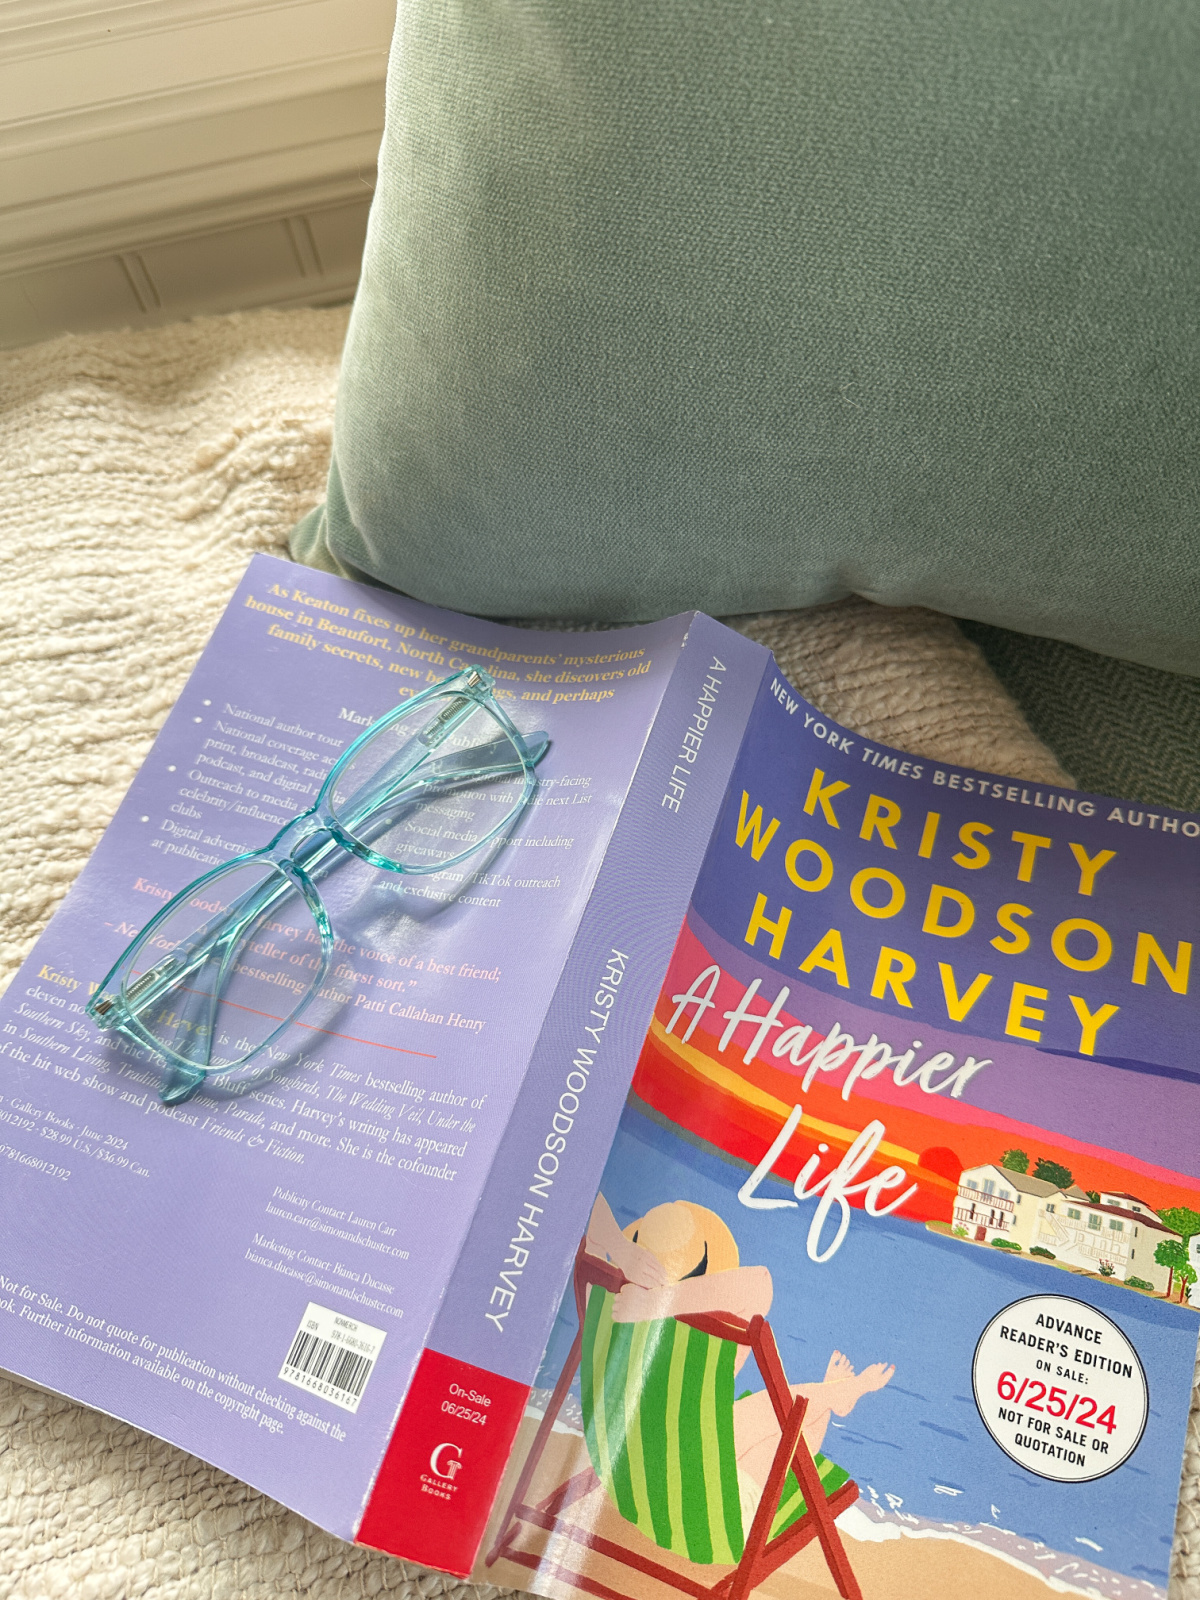 A Happier Life book open on bench next to pillow and a pair of reading glasses.